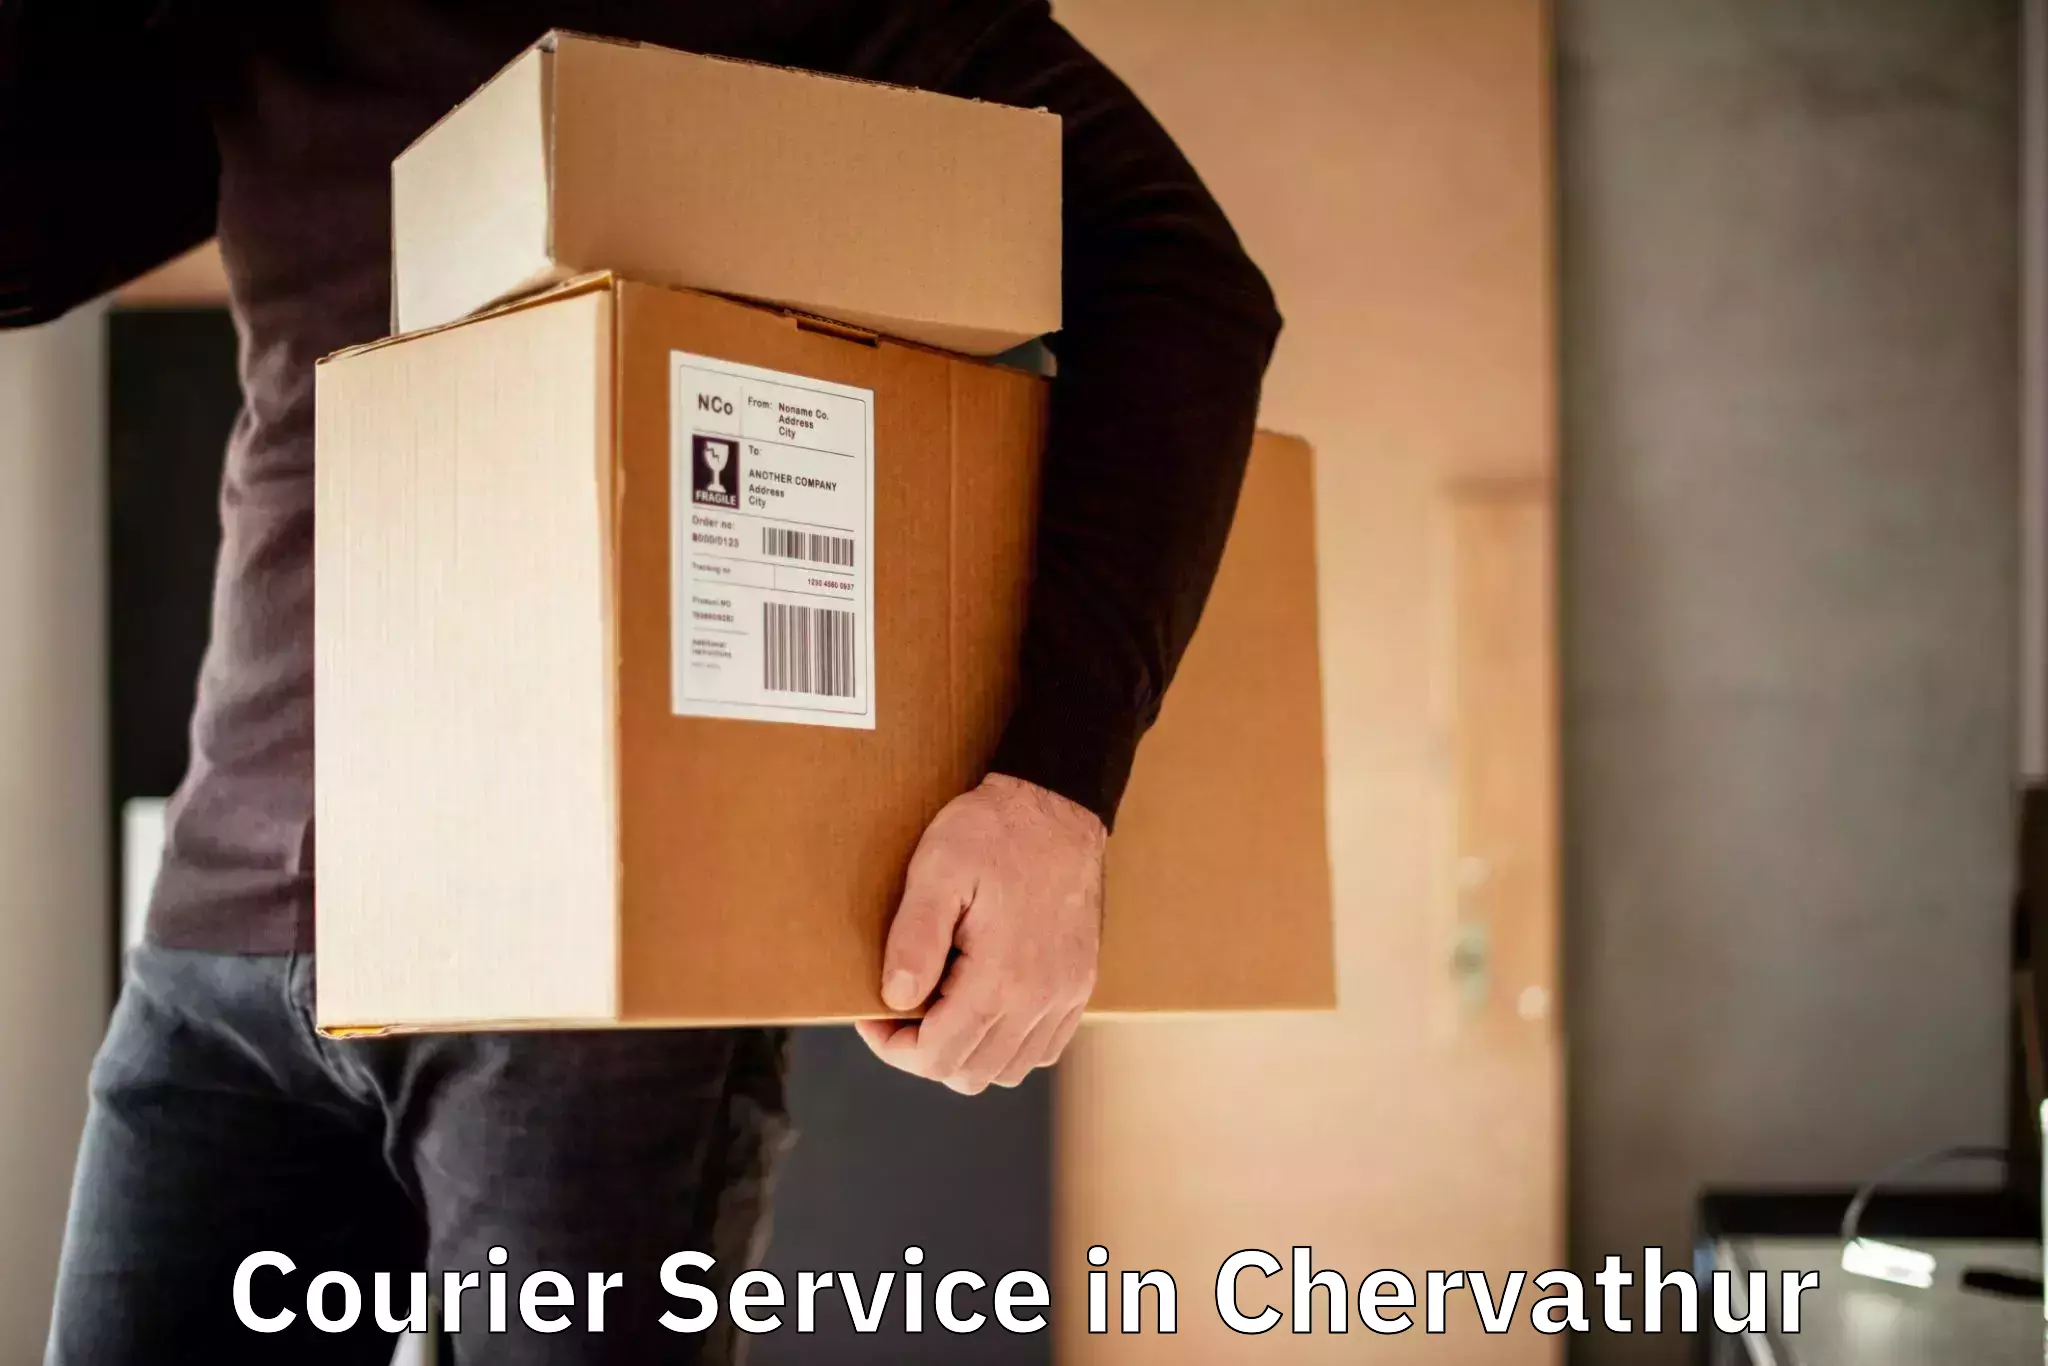 Express logistics providers in Chervathur